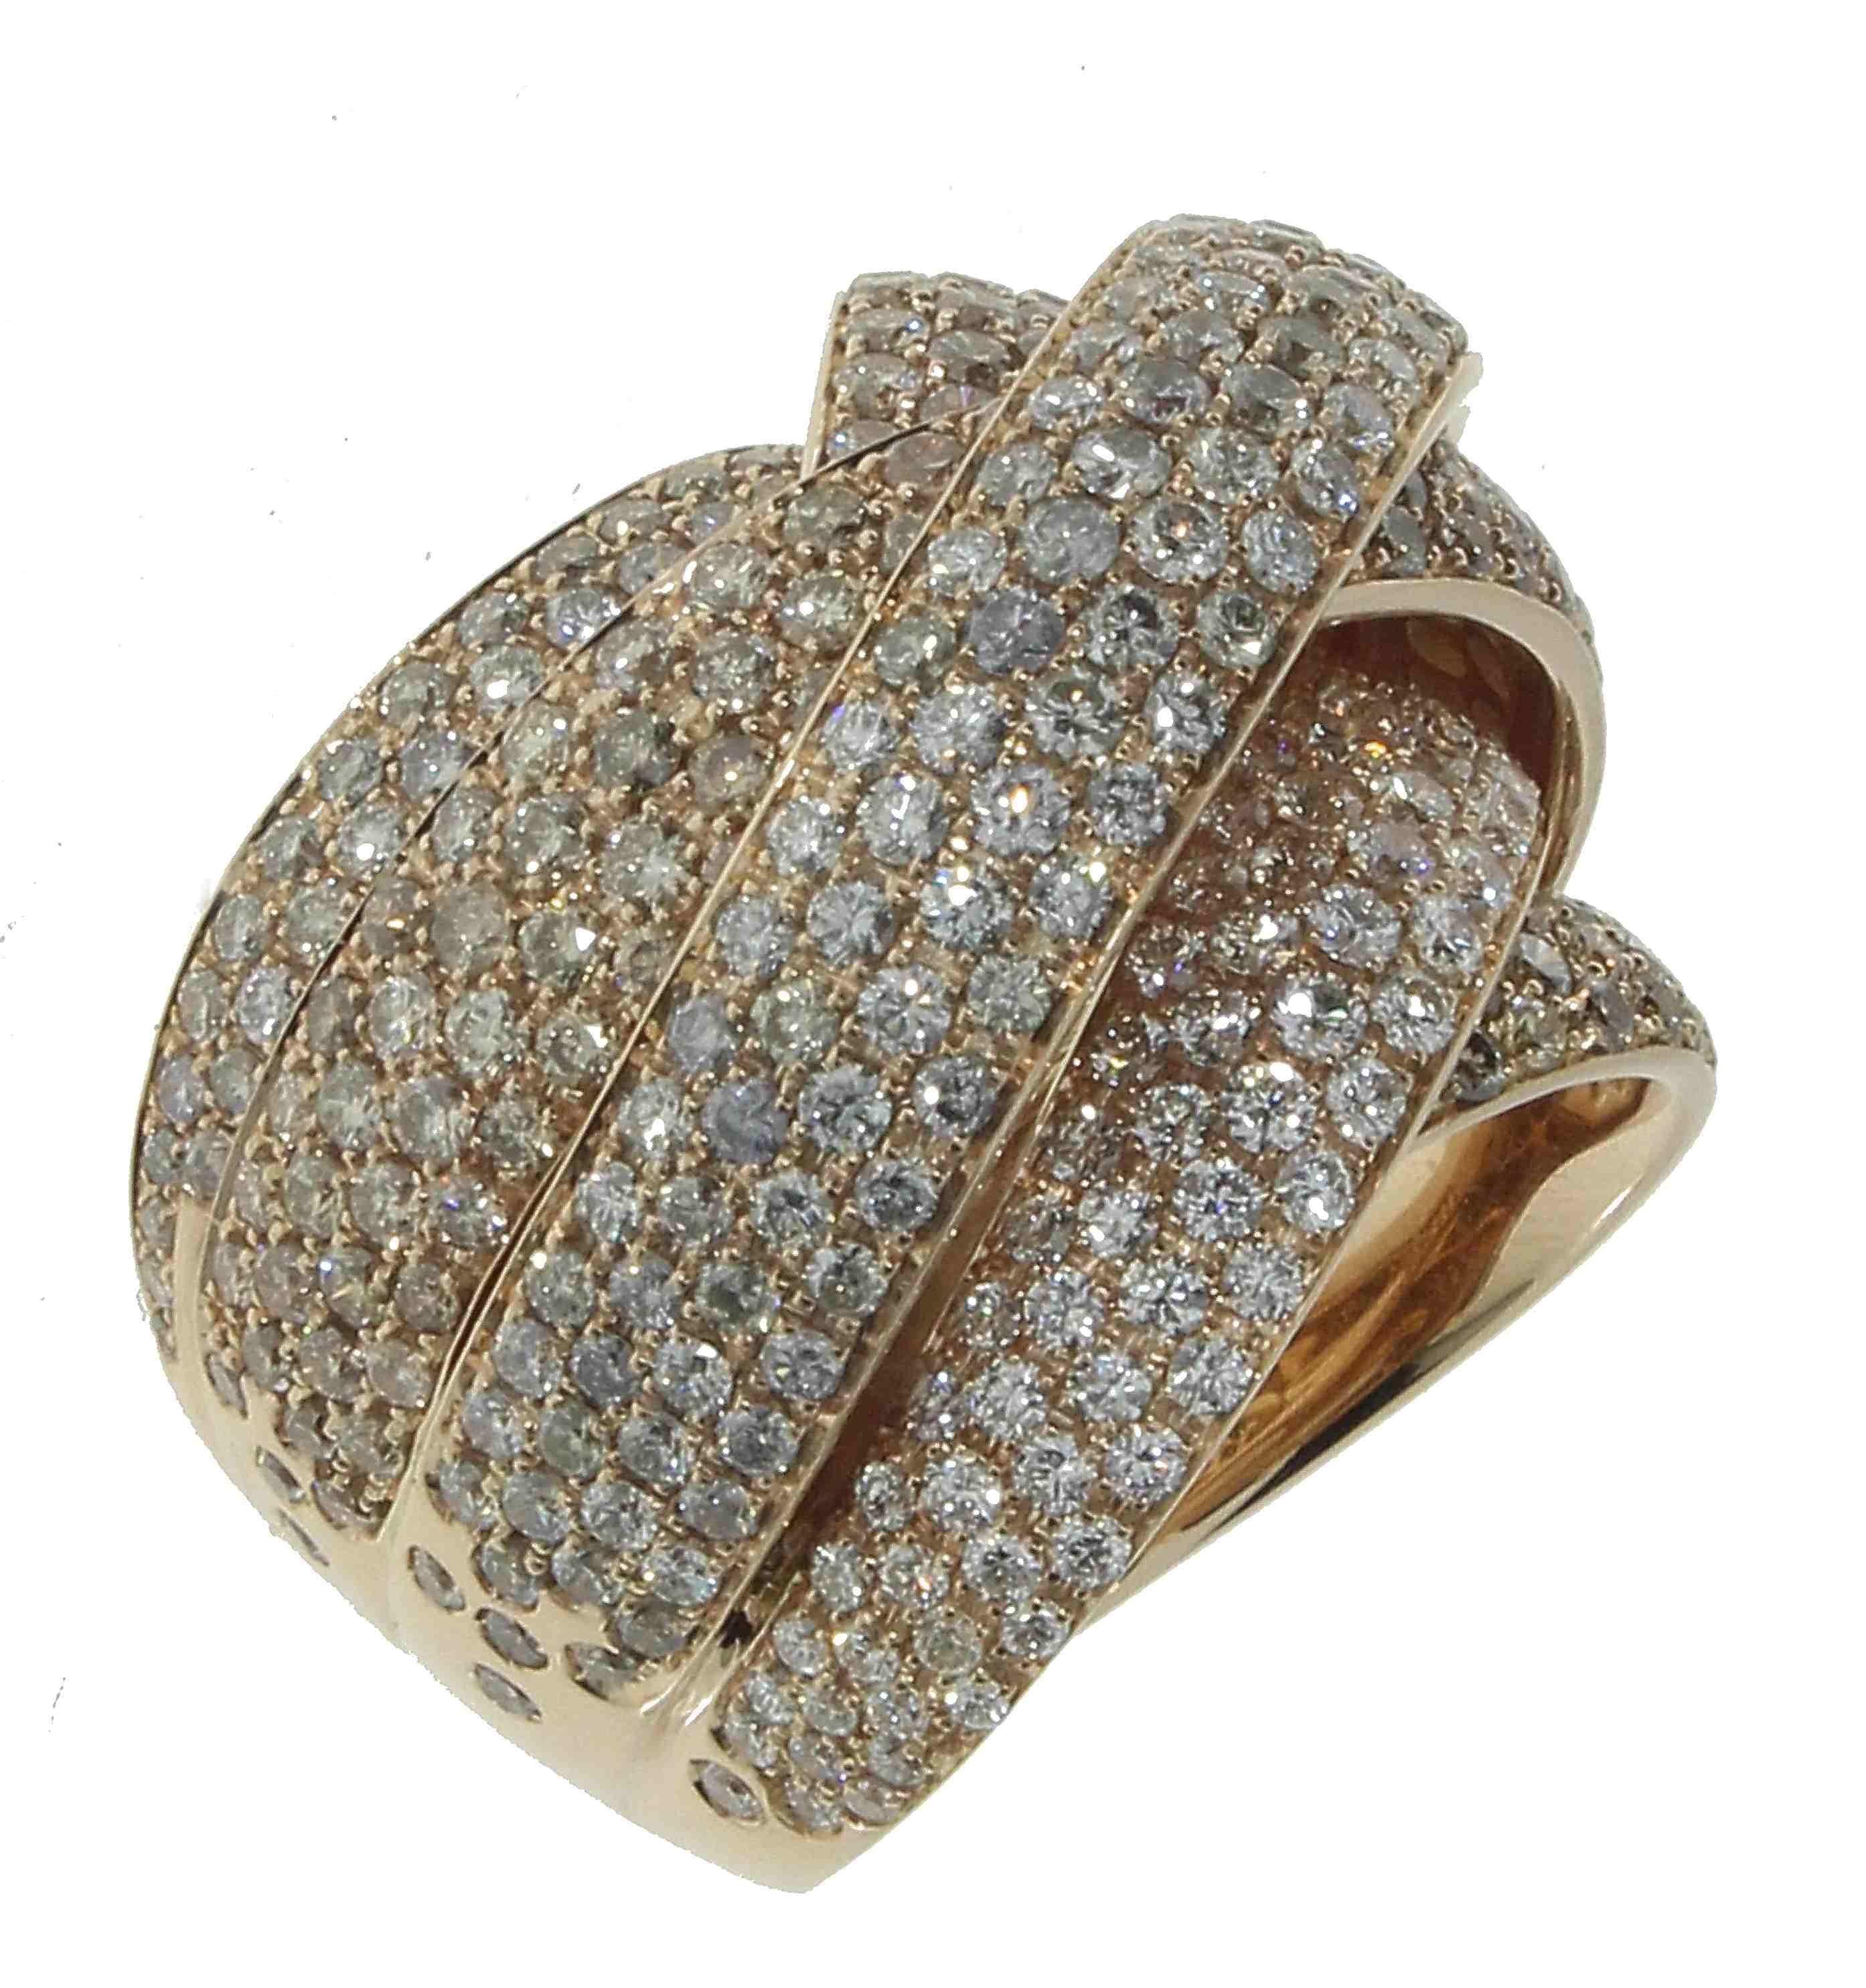 4.63 Ct White, Brown and Grey Diamonds Intertwined Band Ring in 18kt Gold In New Condition For Sale In Valenza, IT